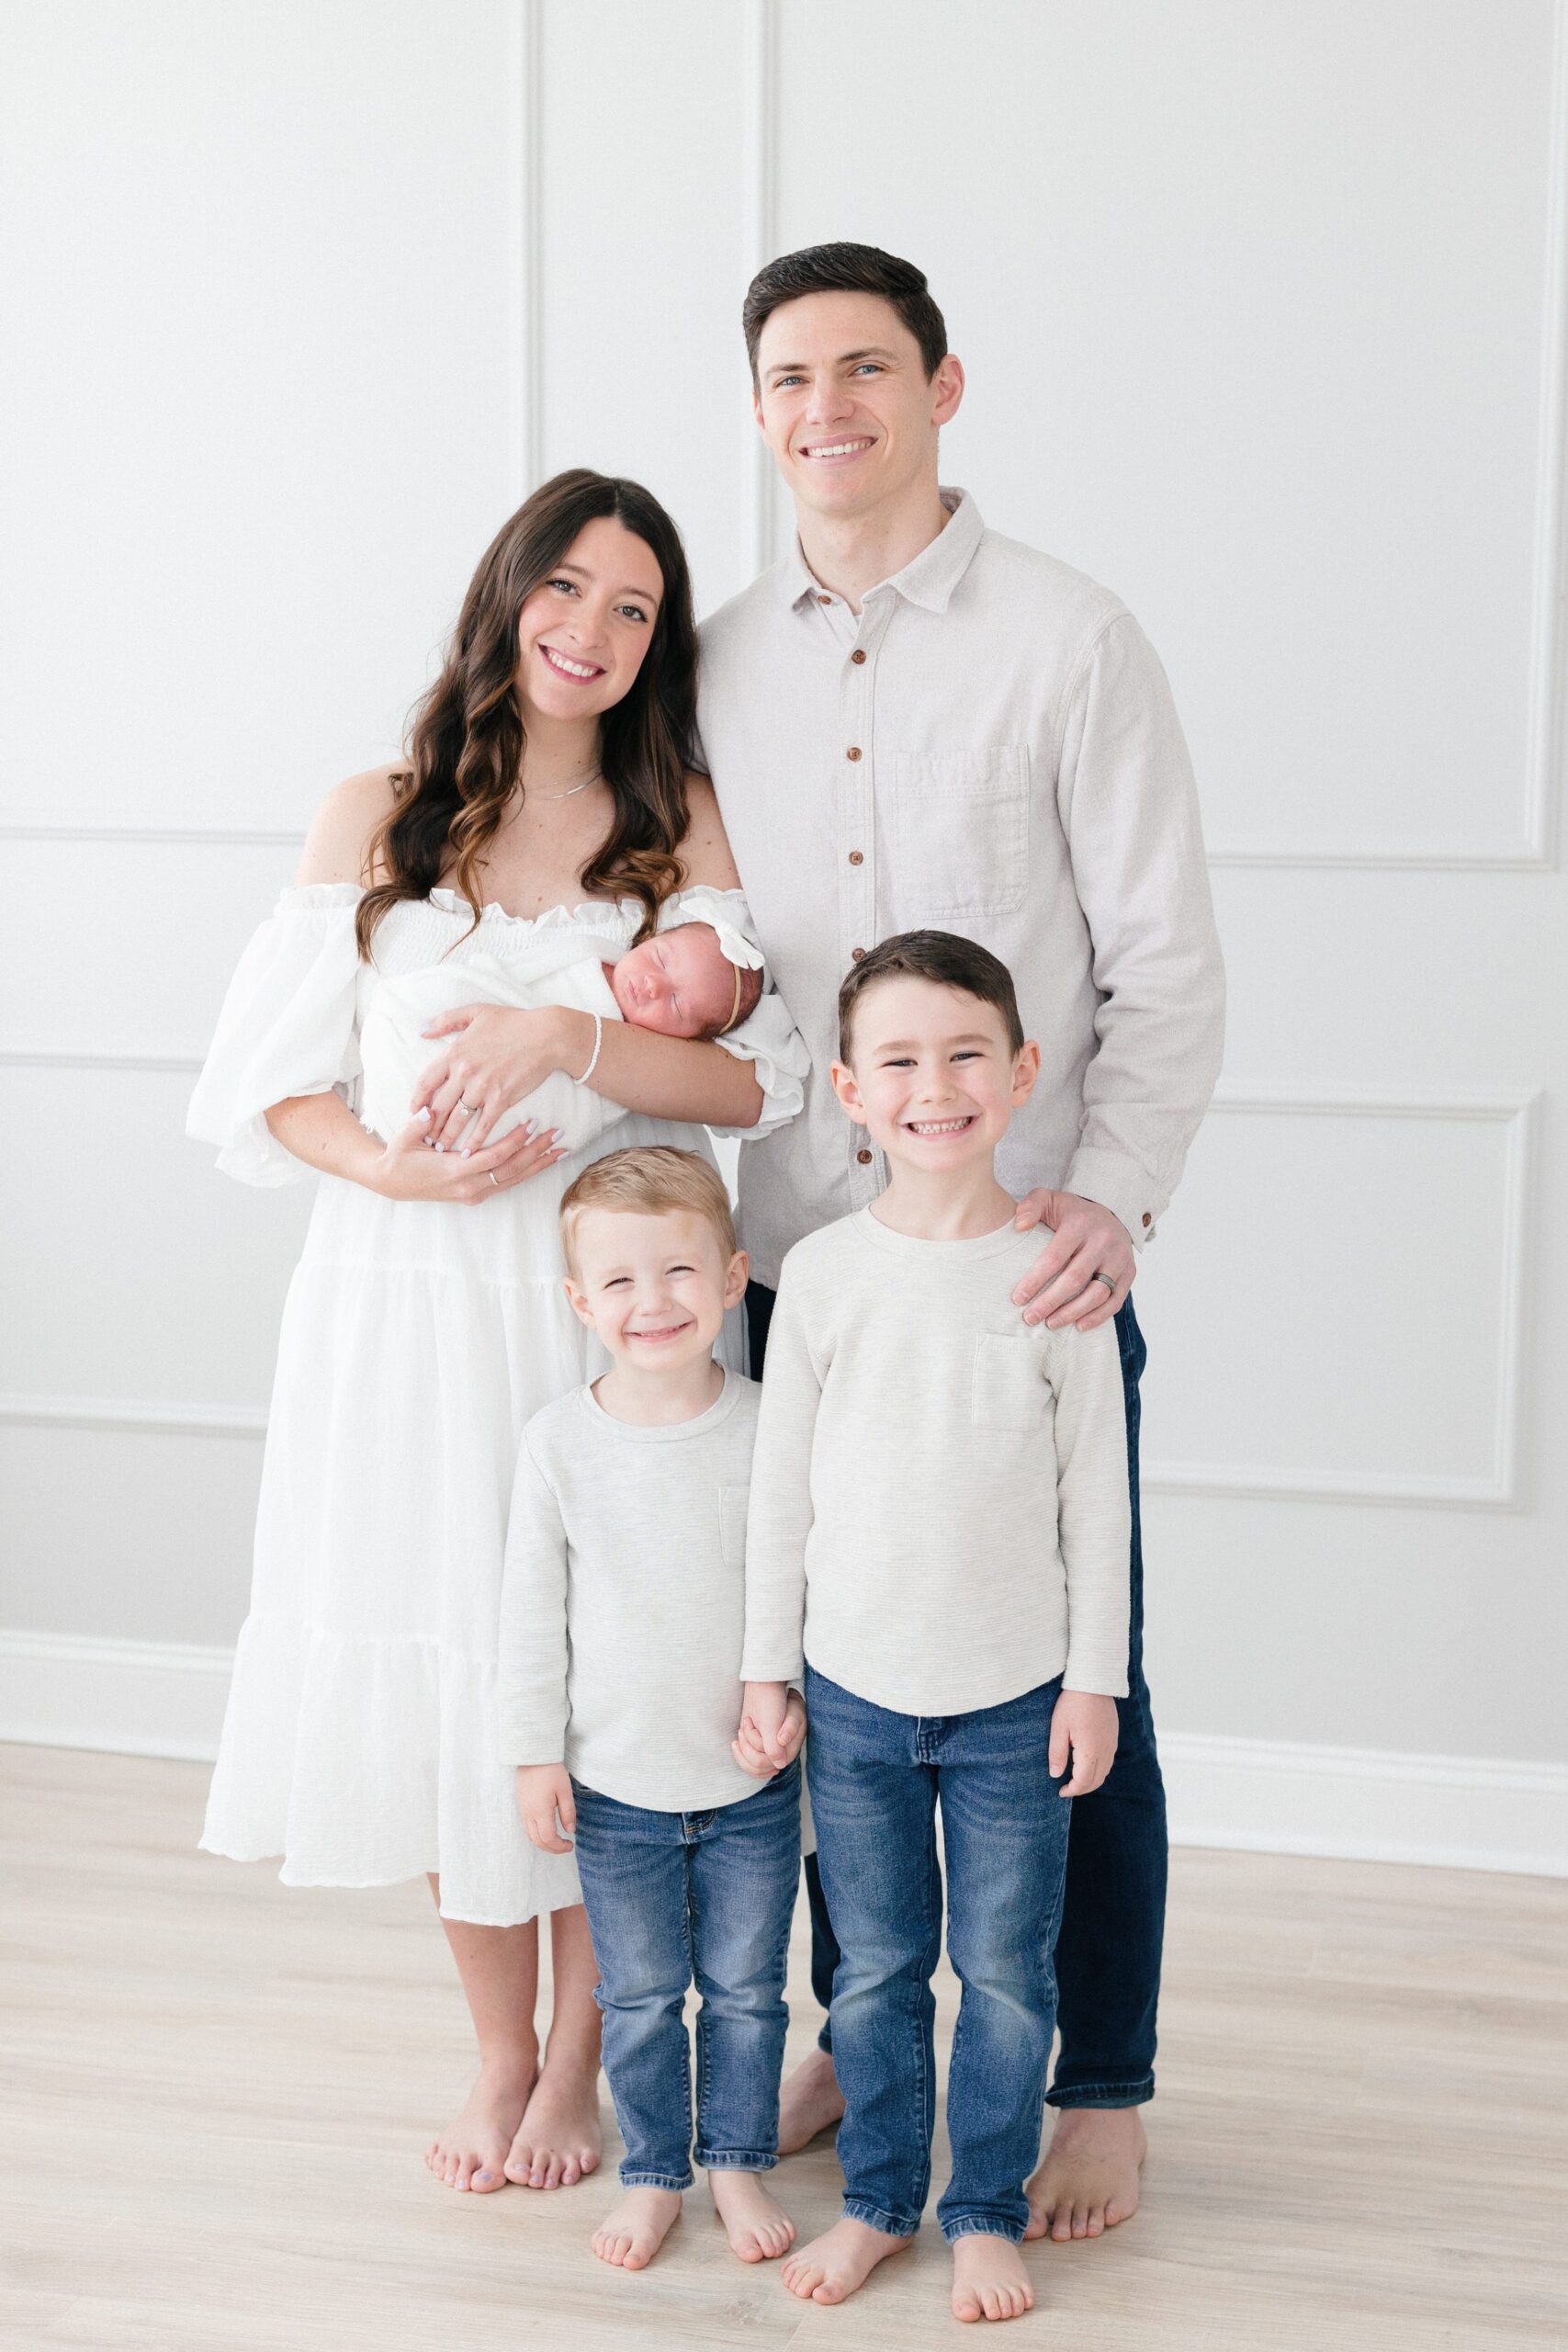 Family of five who learned how to prepare for their newborn session - smiling in a Louisville KY newborn photography studio.